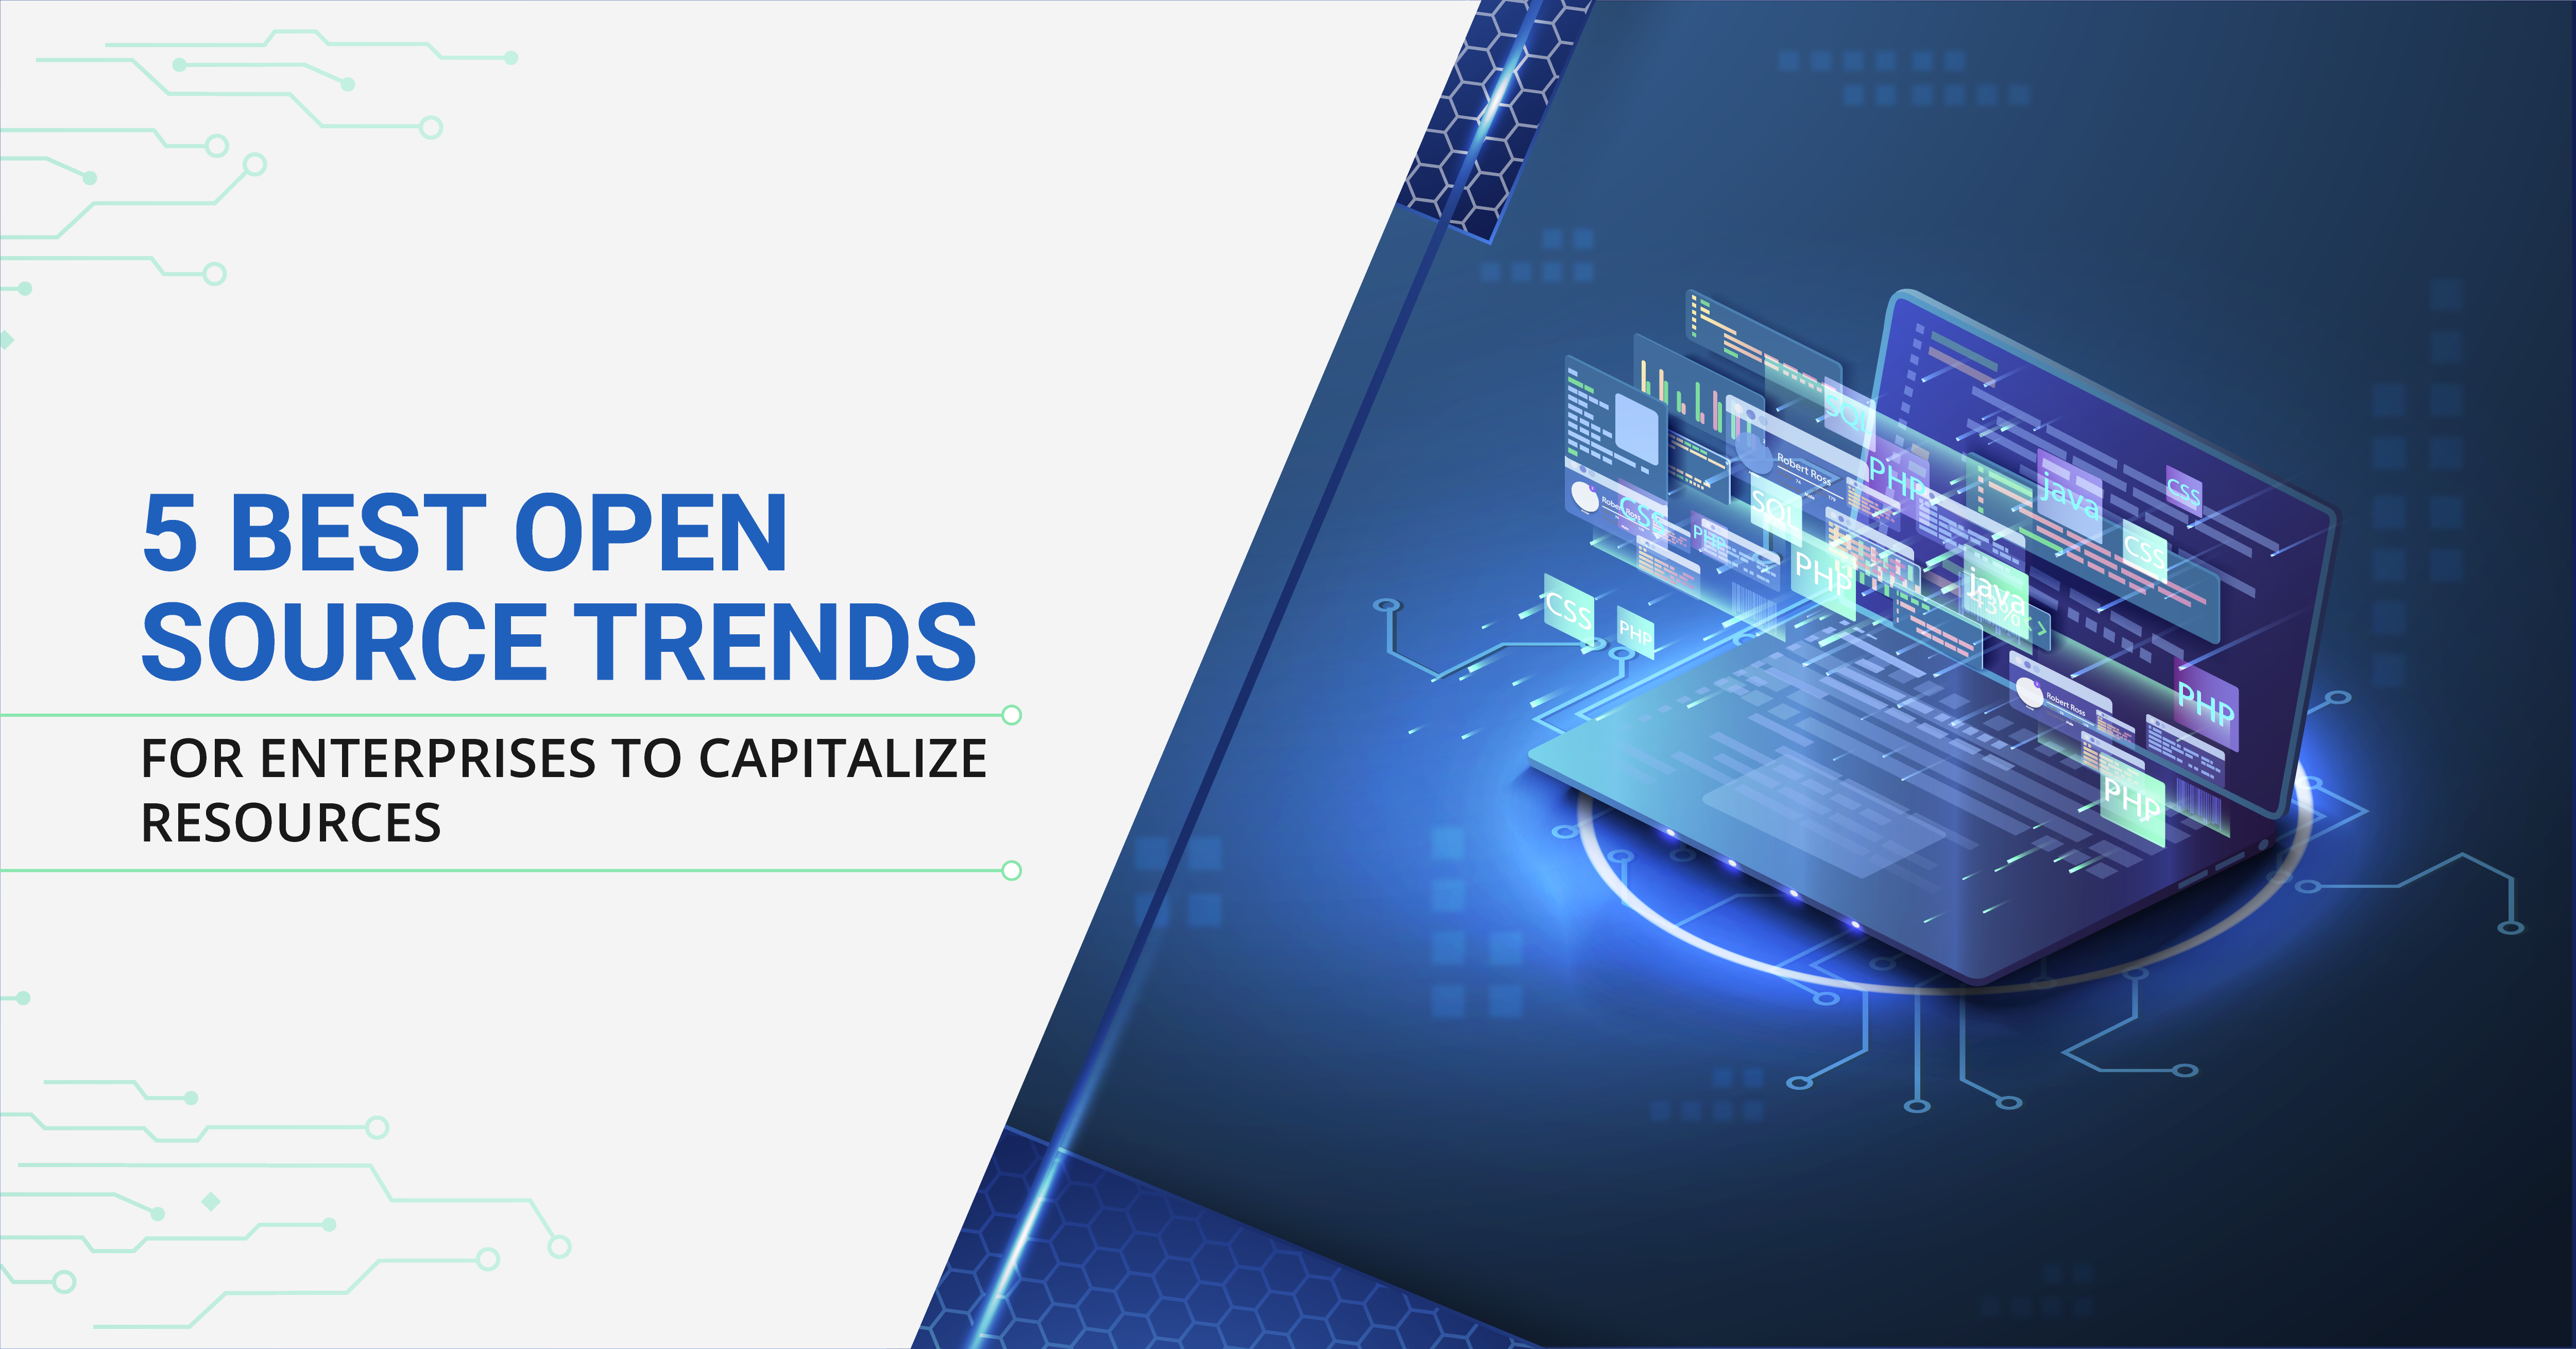 5 Best Open Source Trends for Enterprises to Capitalize Resources